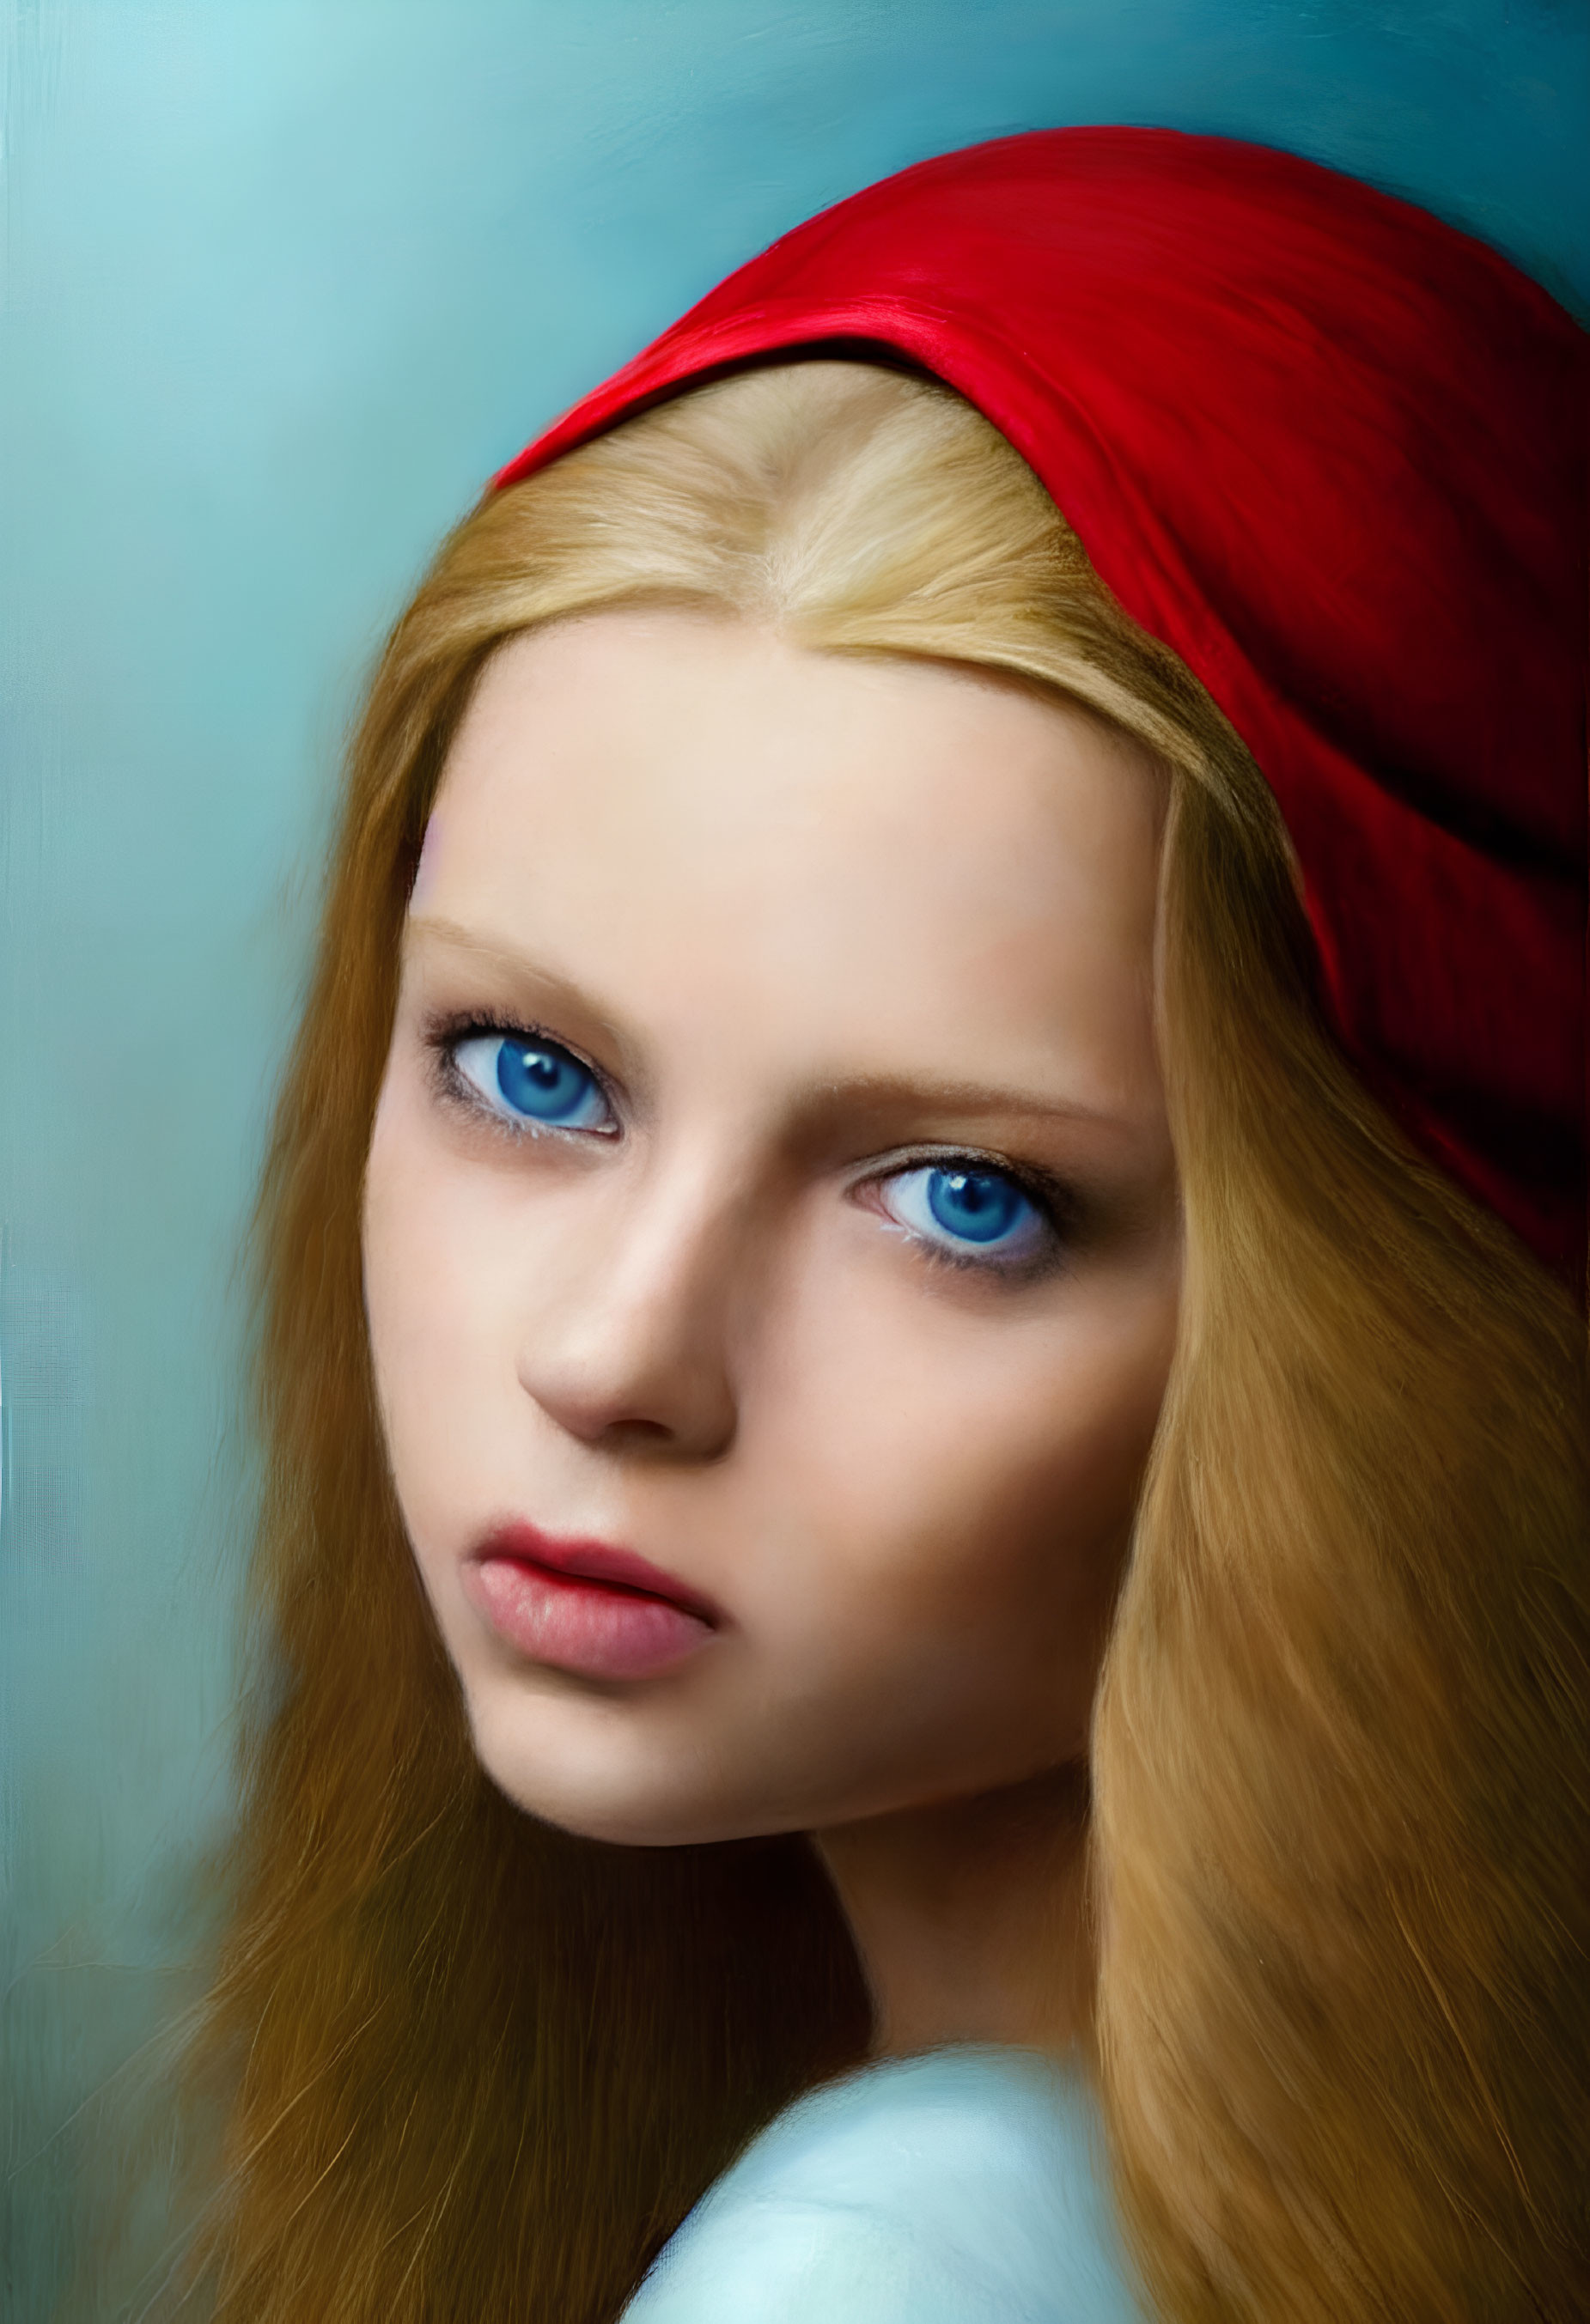 Portrait of young woman with blue eyes, red headscarf, blonde hair